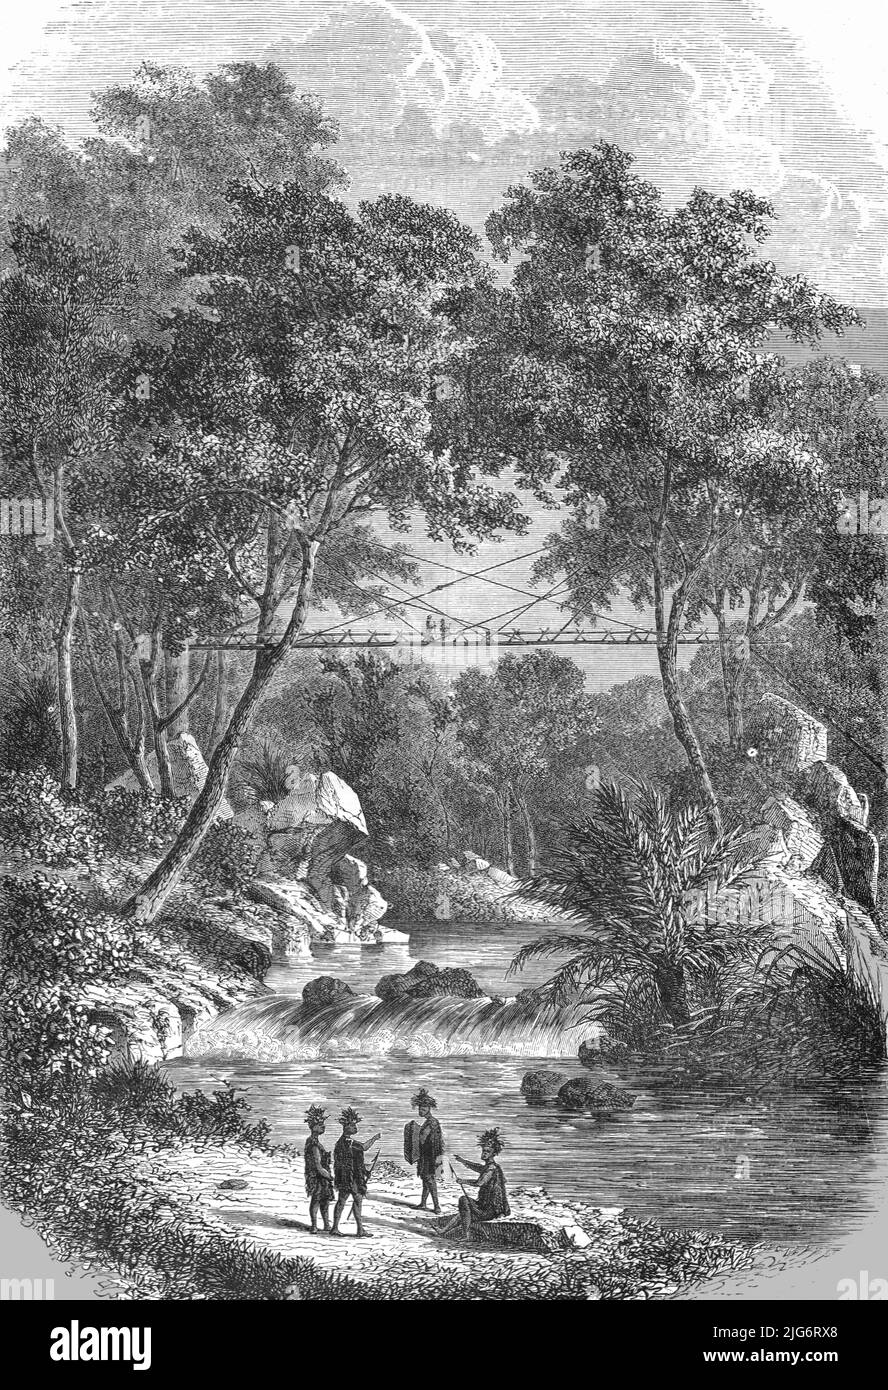 Bamboo Bridge of the Western Dyaks; A Visit to Borneo', 1875. From, 'Illustrated Travels' by H.W. Bates. [Cassell, Petter, and Galpin, c1880, London] Belle Sauvage Works.London E.C. Stock Photo